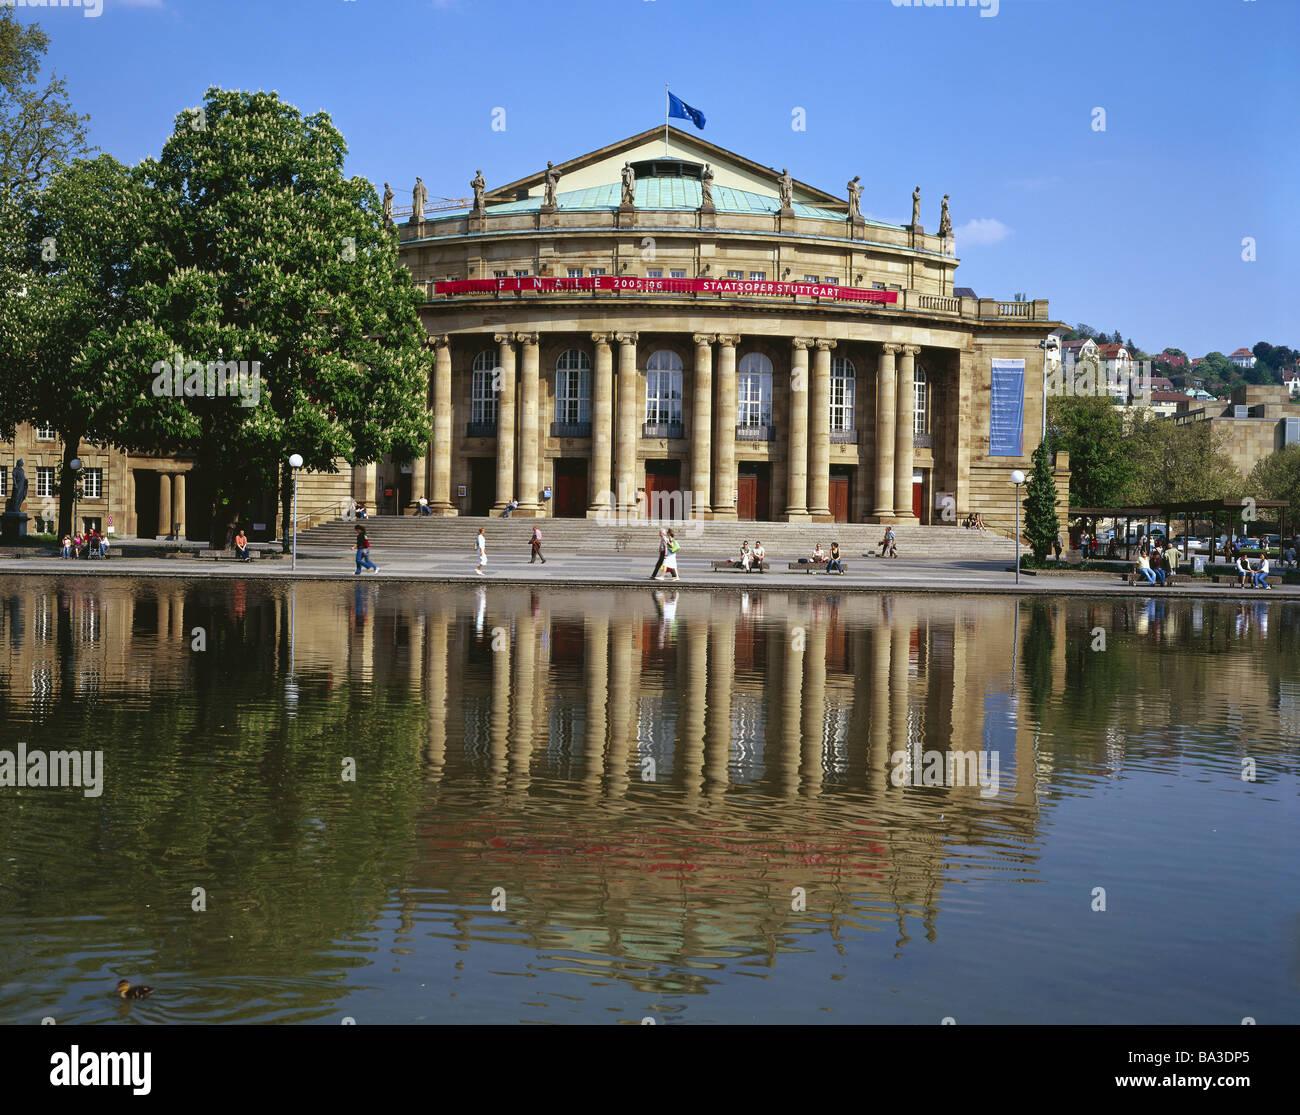 Germany Baden-Württemberg Stuttgart state-theaters pond tourists Württembergisches state-theaters 'big house' buildings Stock Photo